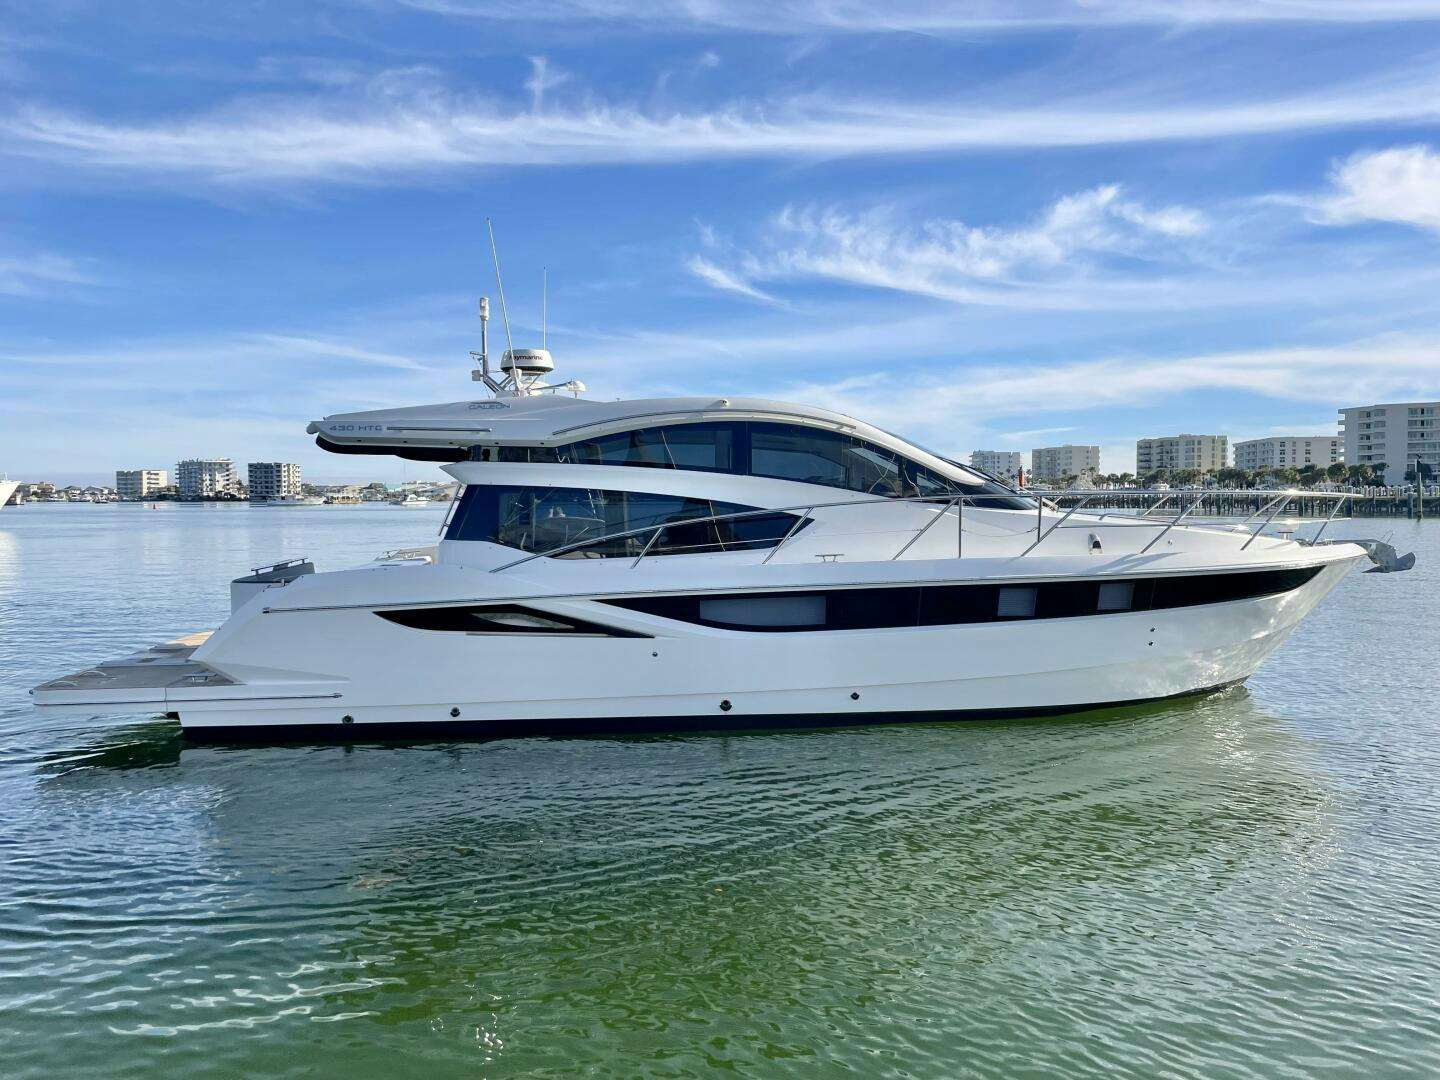 Gys trade
Yacht for Sale